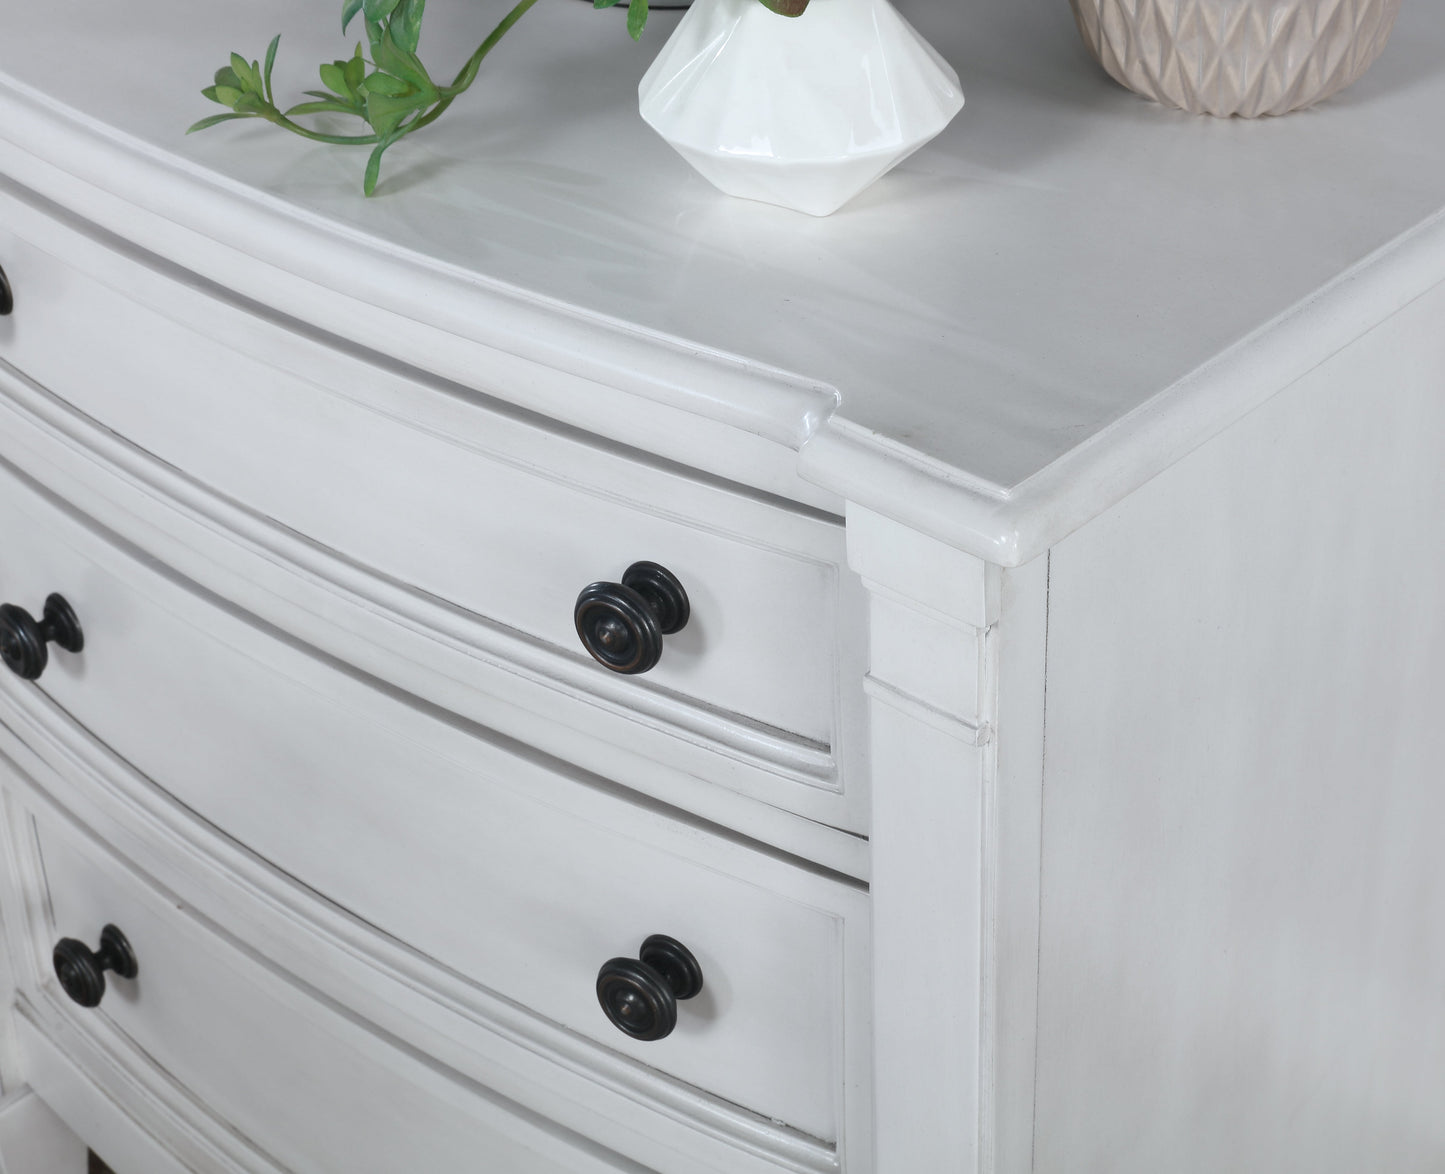 Saline Wood Planked Style 3-Drawer Nightstand in White Finish